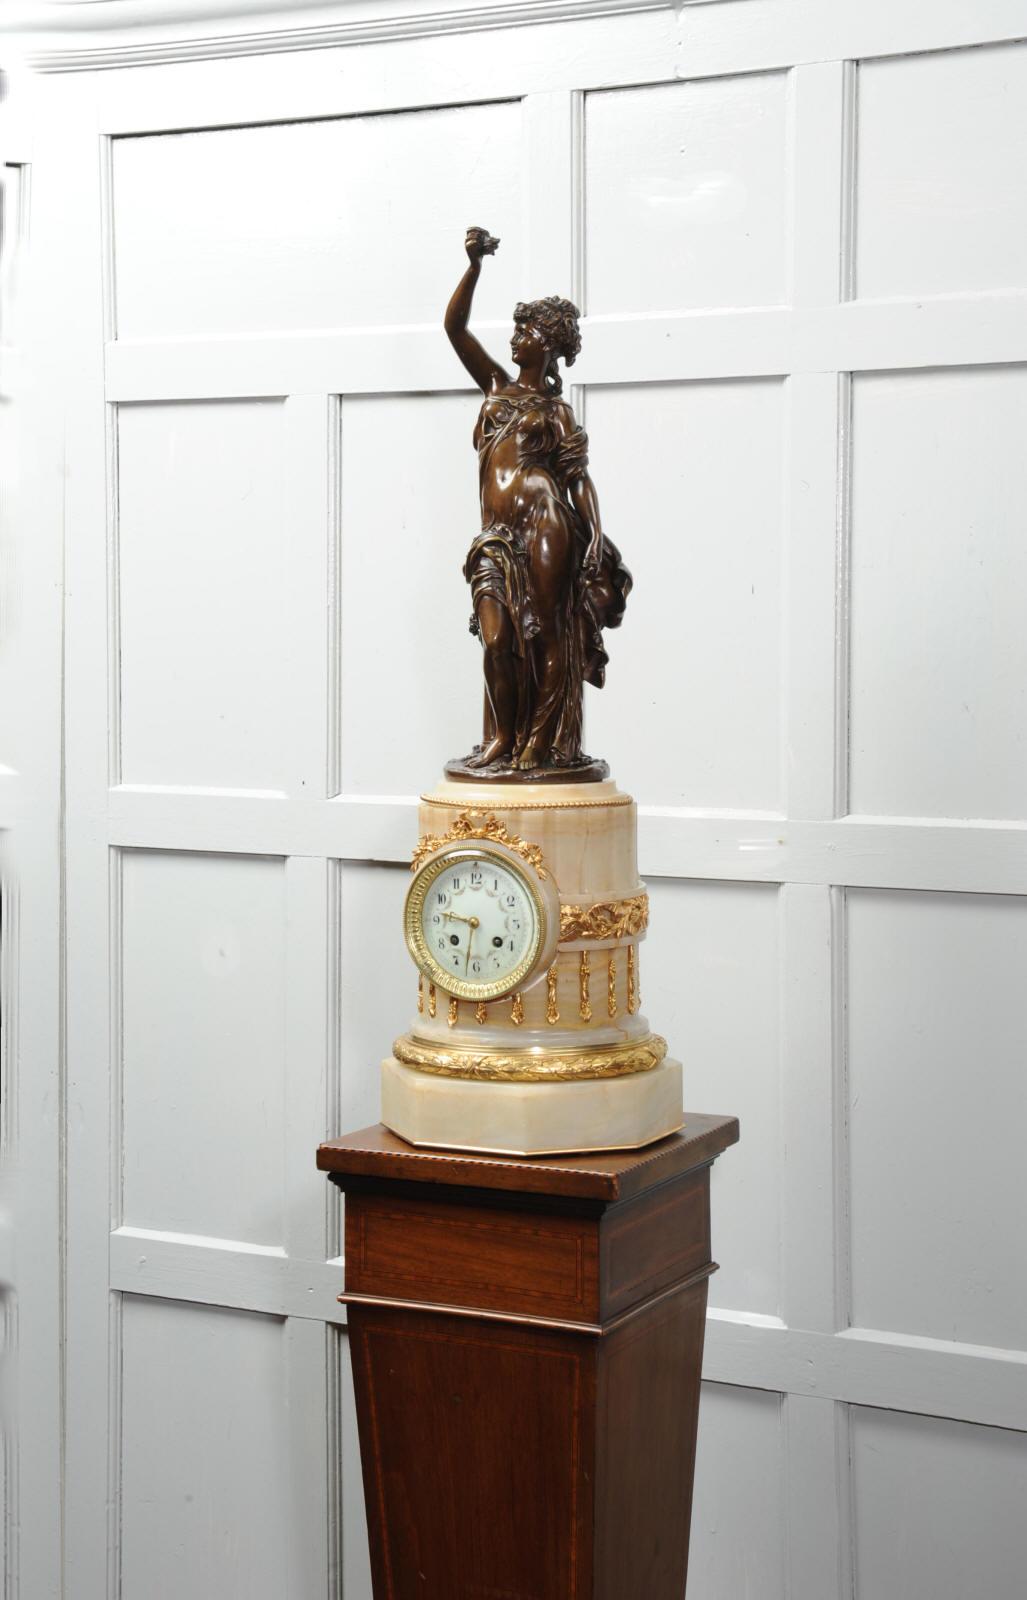 A stunning antique French clock circa 1890, the large ormolu mounted onxy columnar plinth housing the movement by Japy Freres and the superb antique bronze figure by sculptor Hippolyte Francois Moreau (1832-1927). The figure is La Rosé, she holds a